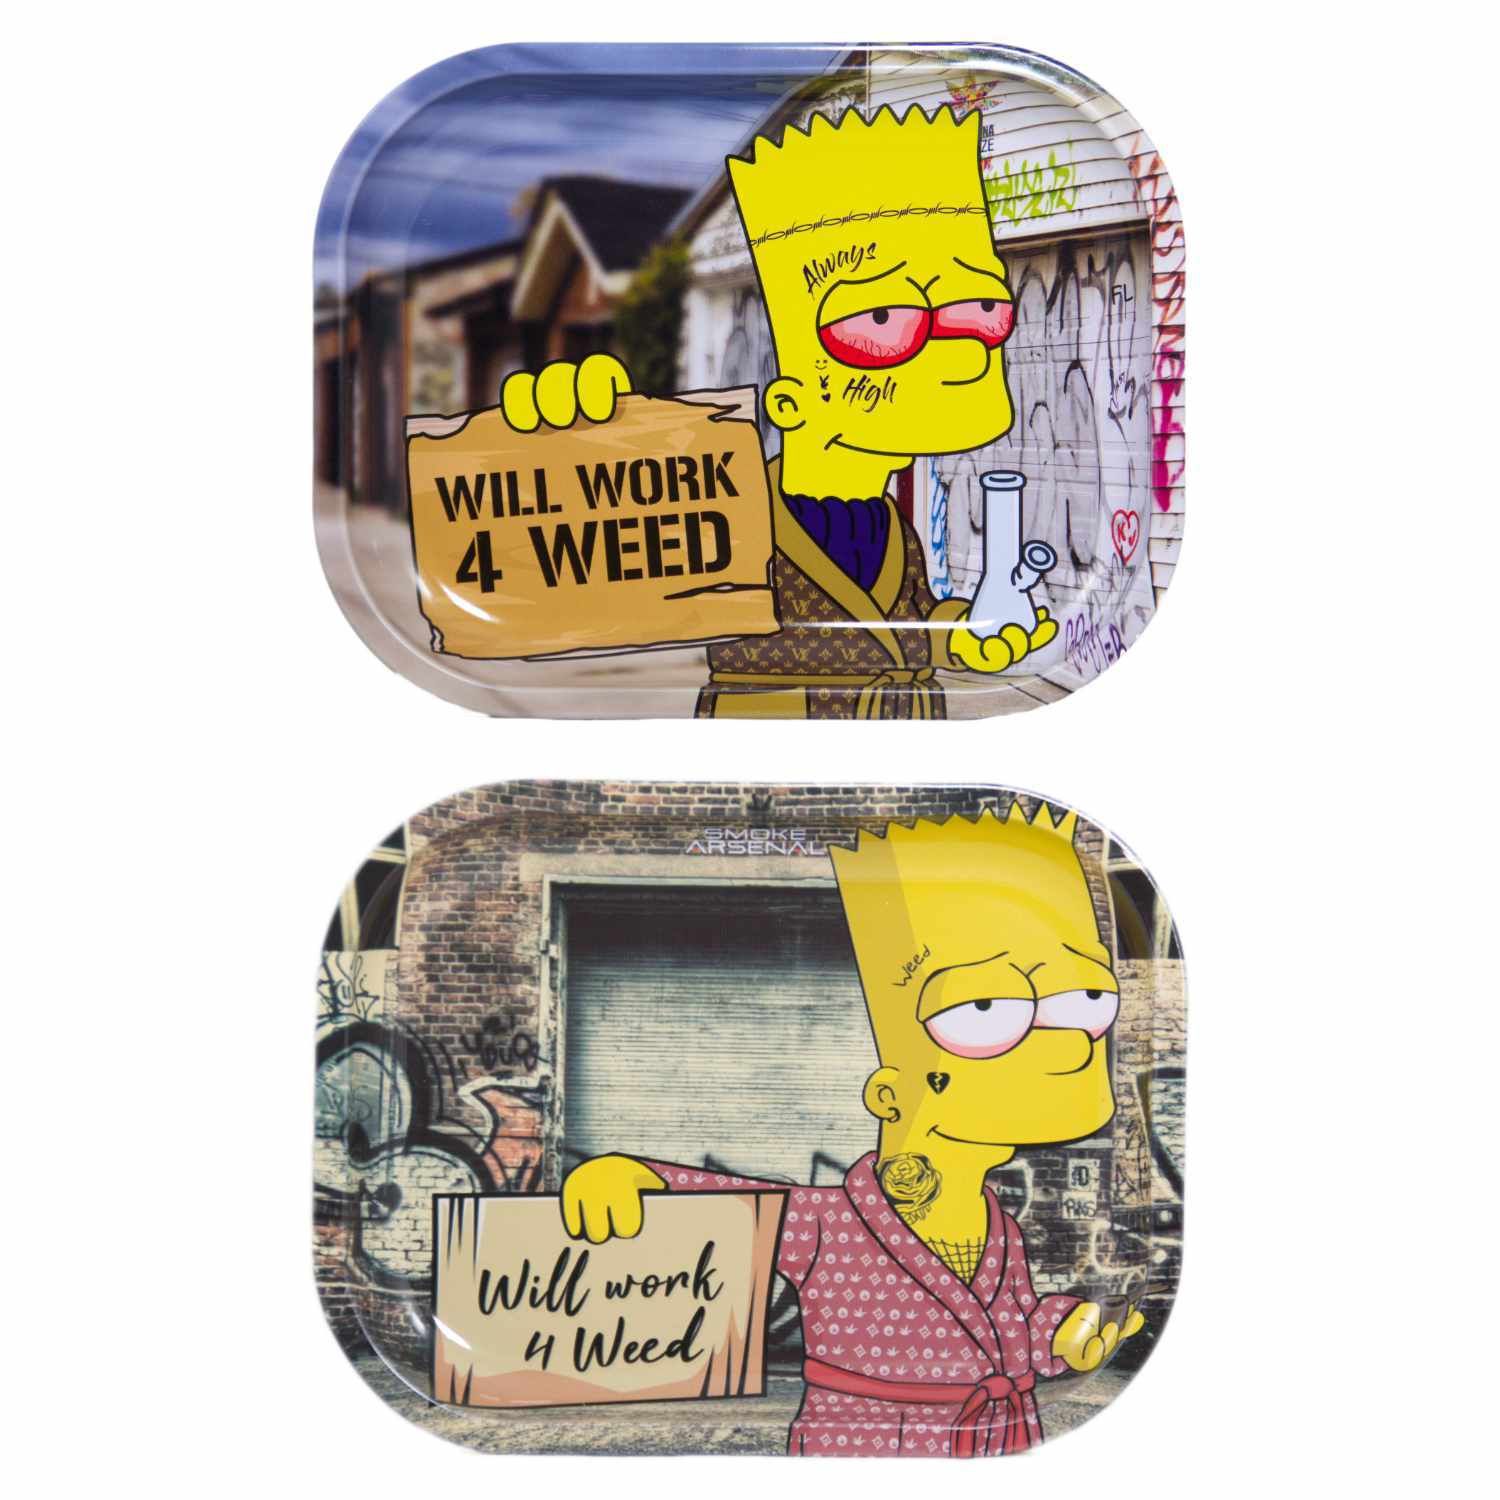 Plateau à rouler Bart Simpson “Will Work 4 Weed”